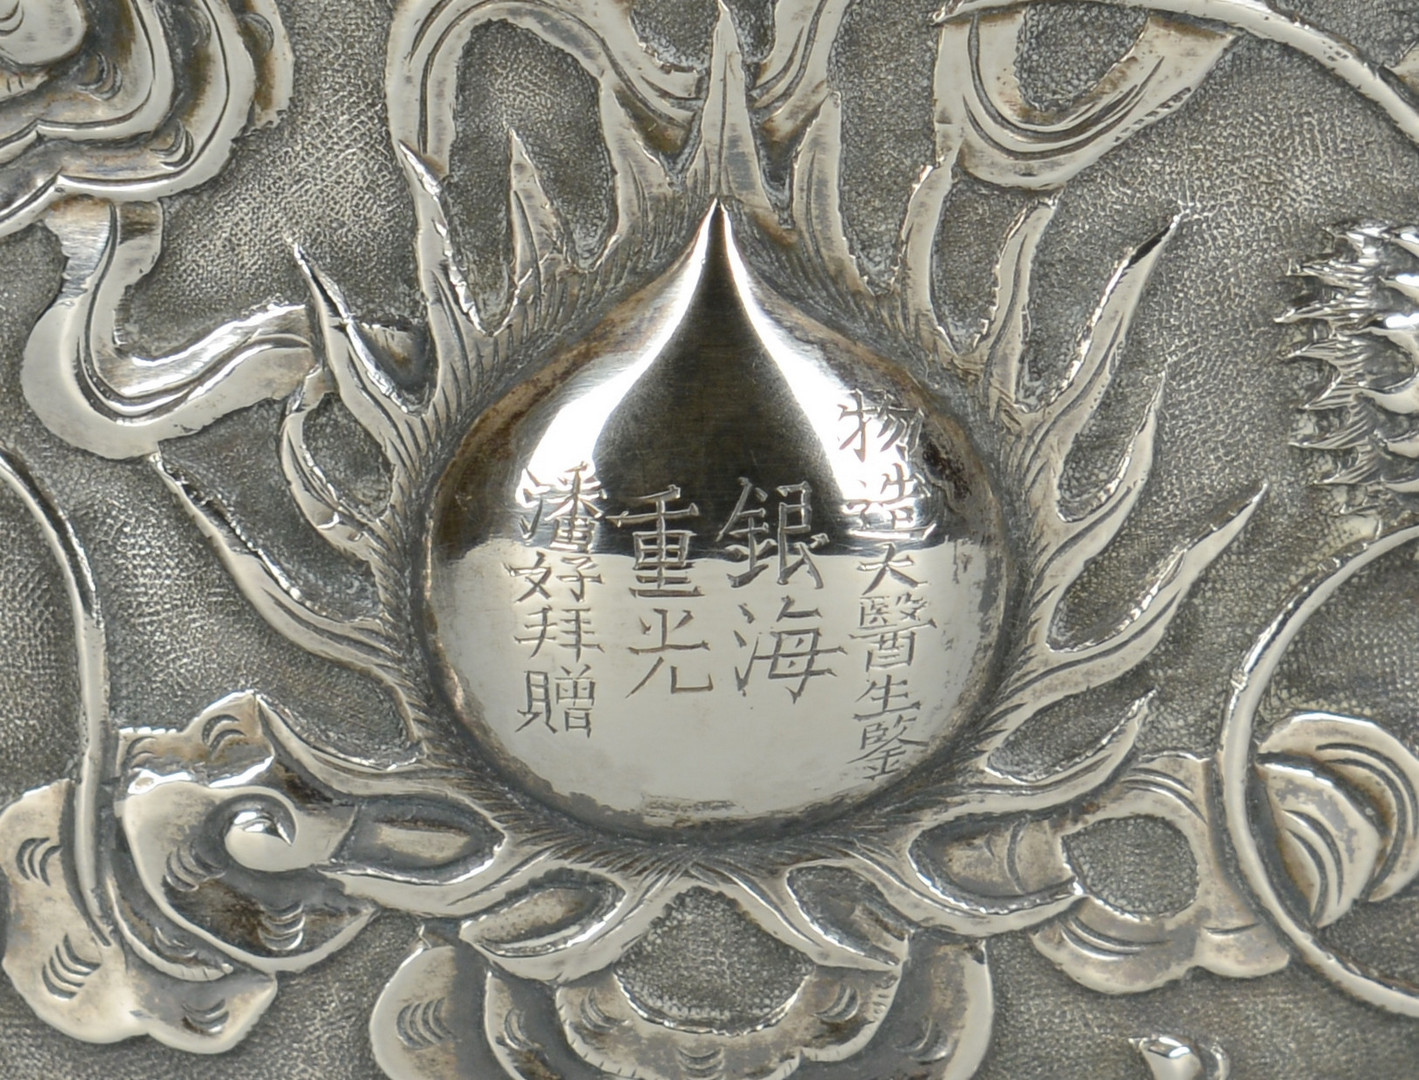 Lot 8: Chinese Export Silver Bowl w/ Dragon Design